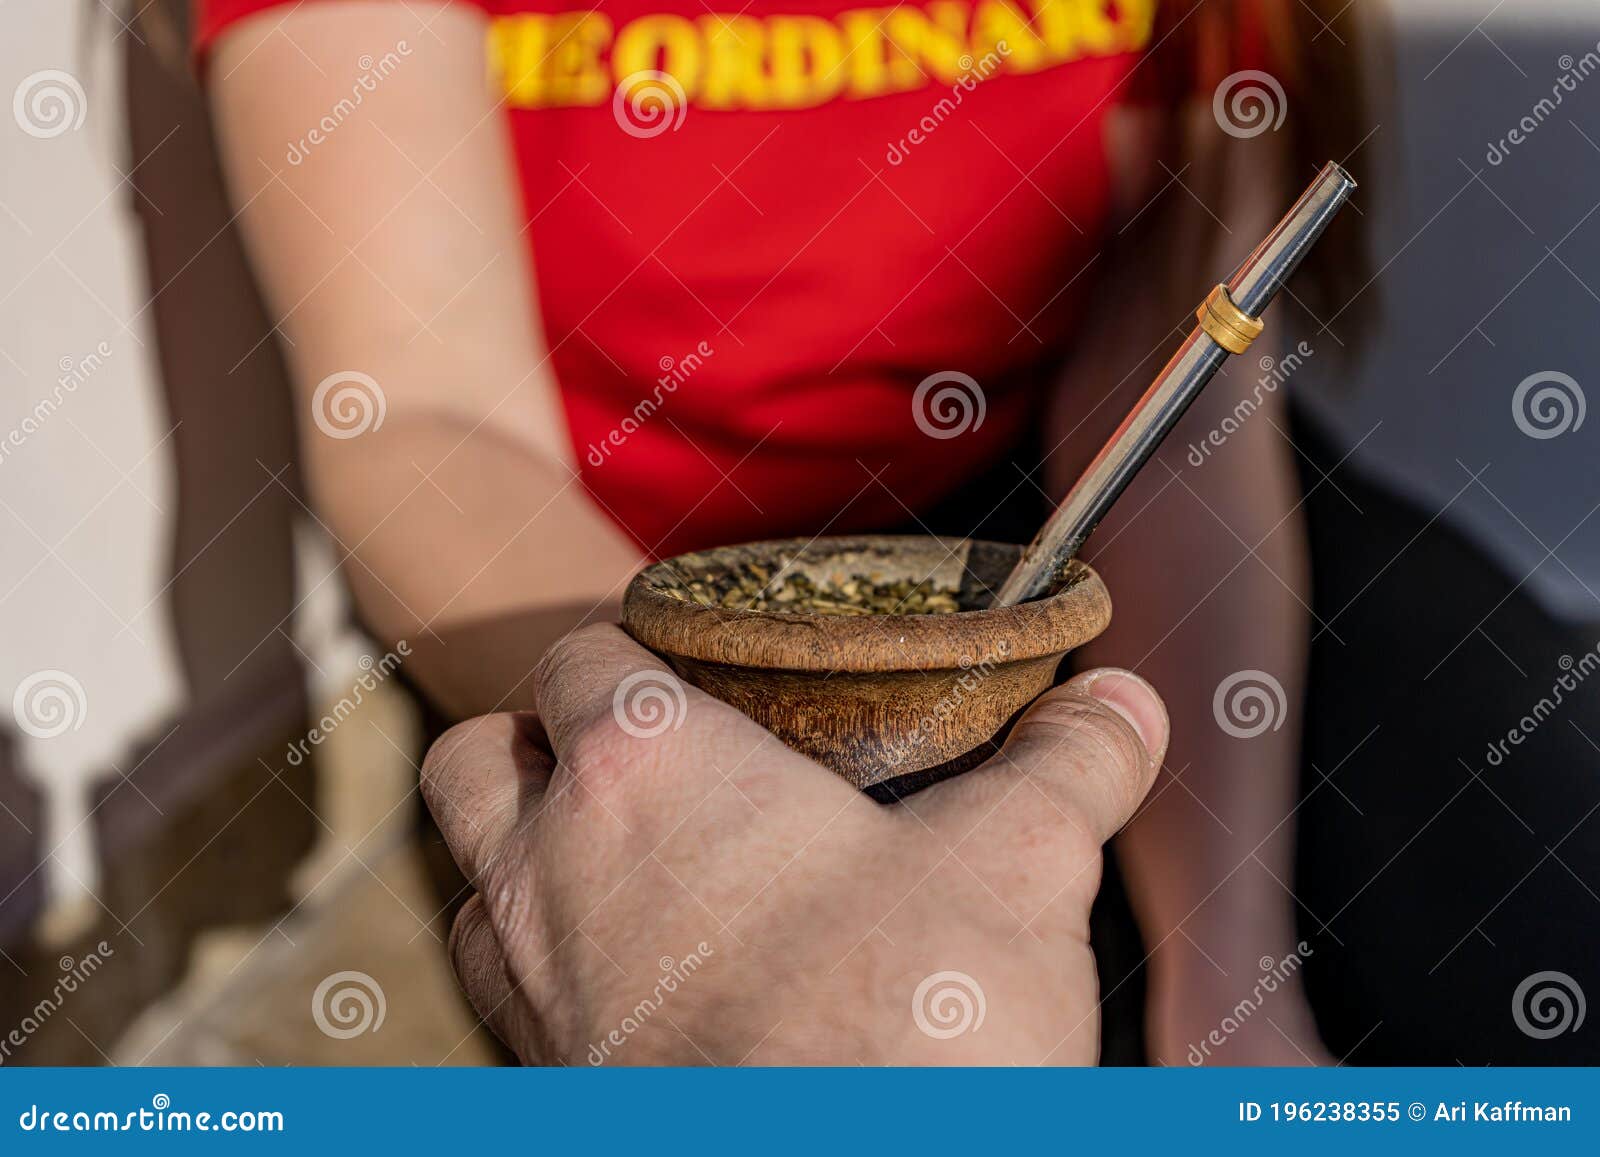 argentinean woman sharing a traditional mate